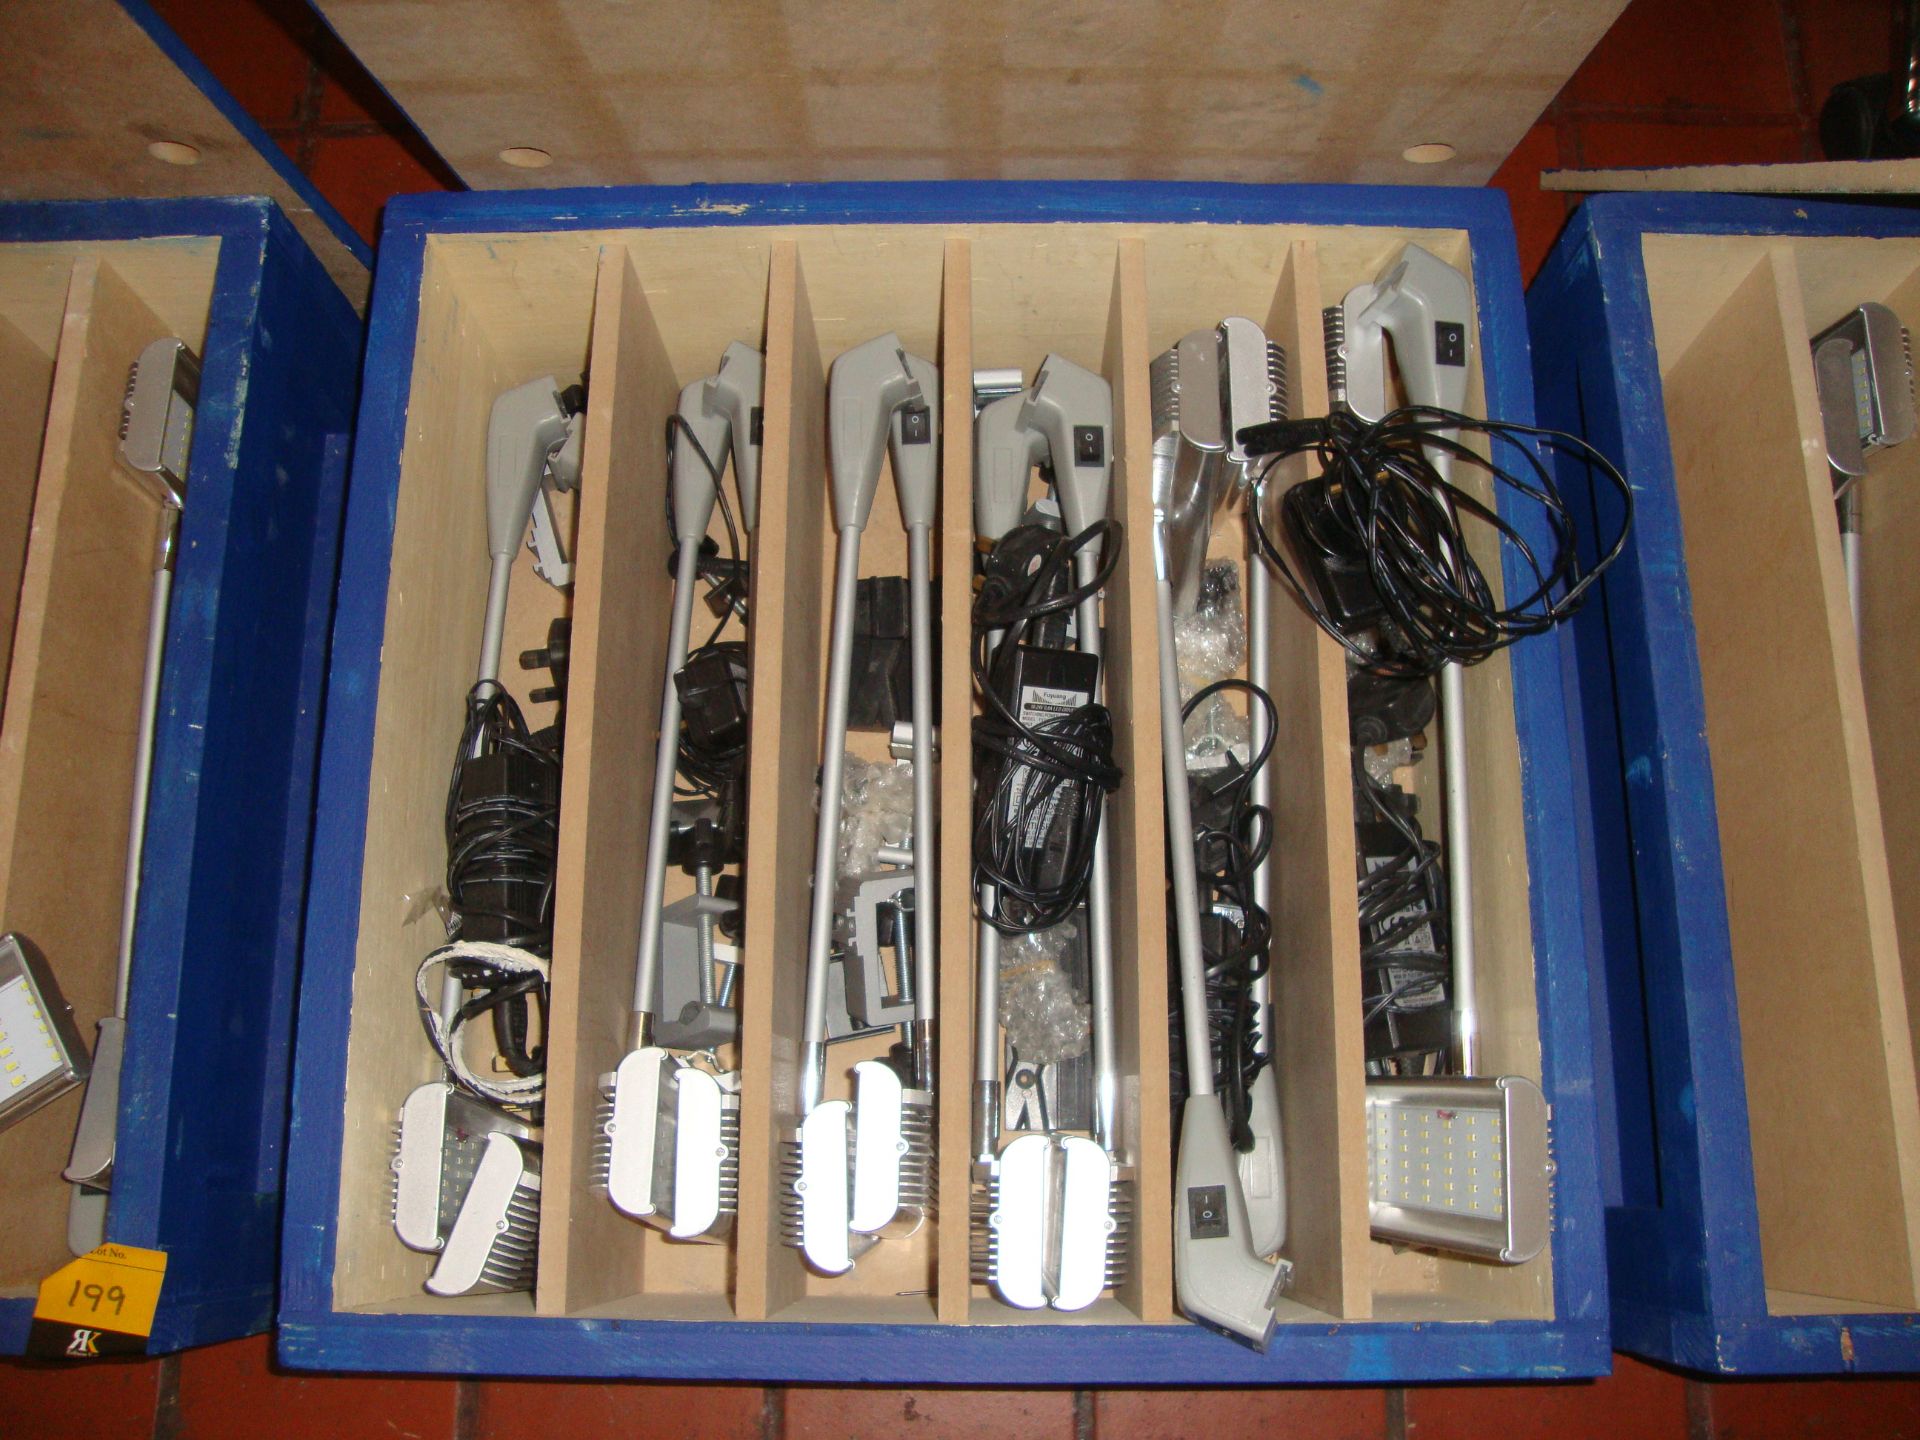 34 off LED low voltage display lamps in a total of 3 dedicated carry boxes for use with same - Image 11 of 11